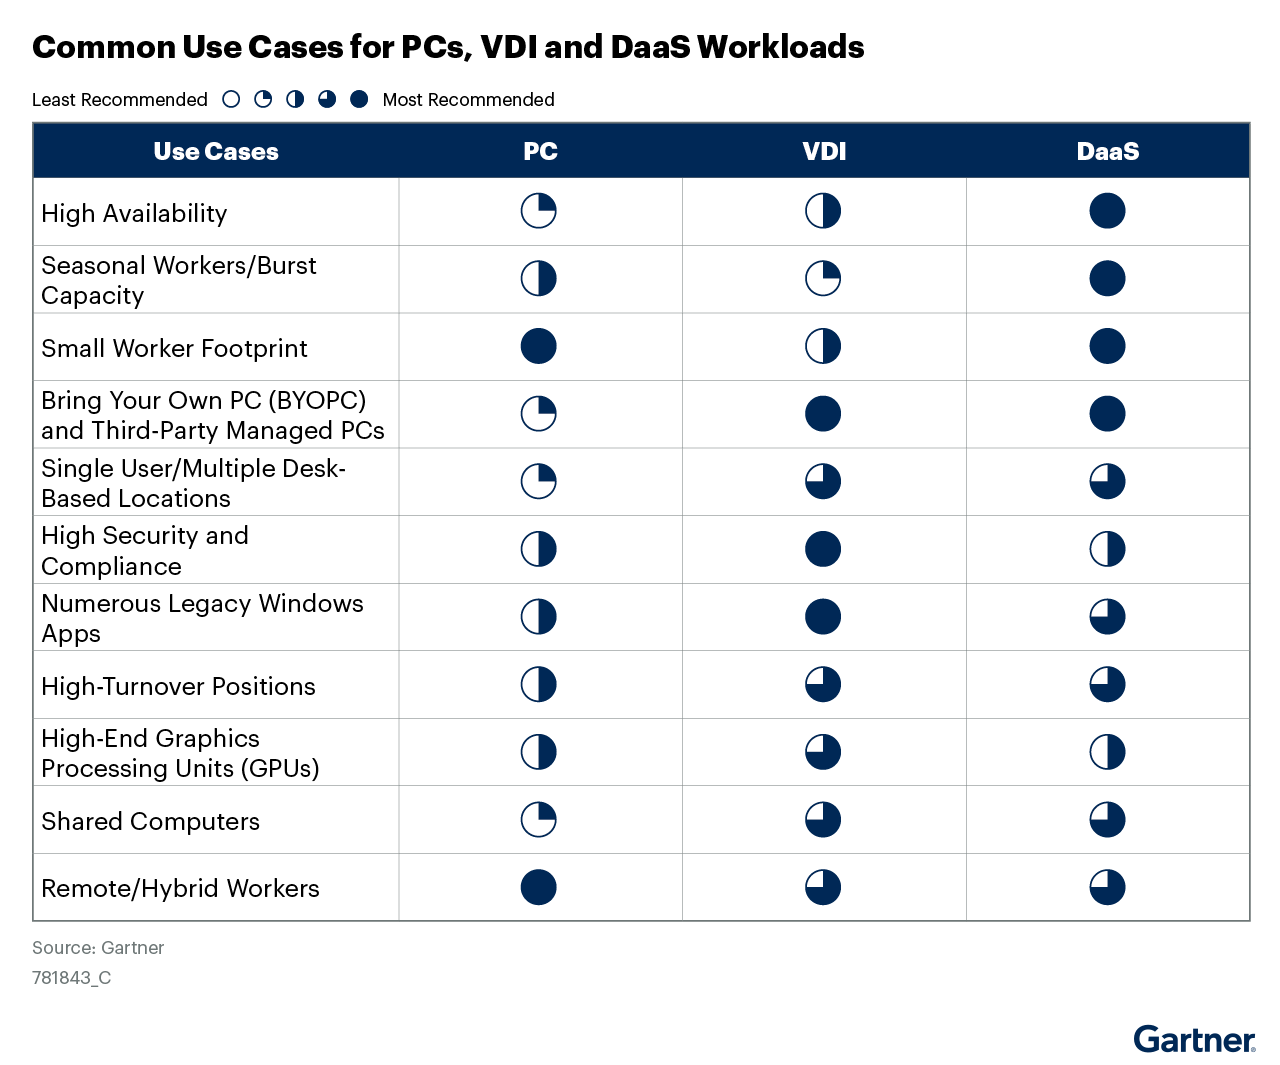 Figure_1_Common_Use_Cases_for_PCs_VDI_and_DaaS_Workloads